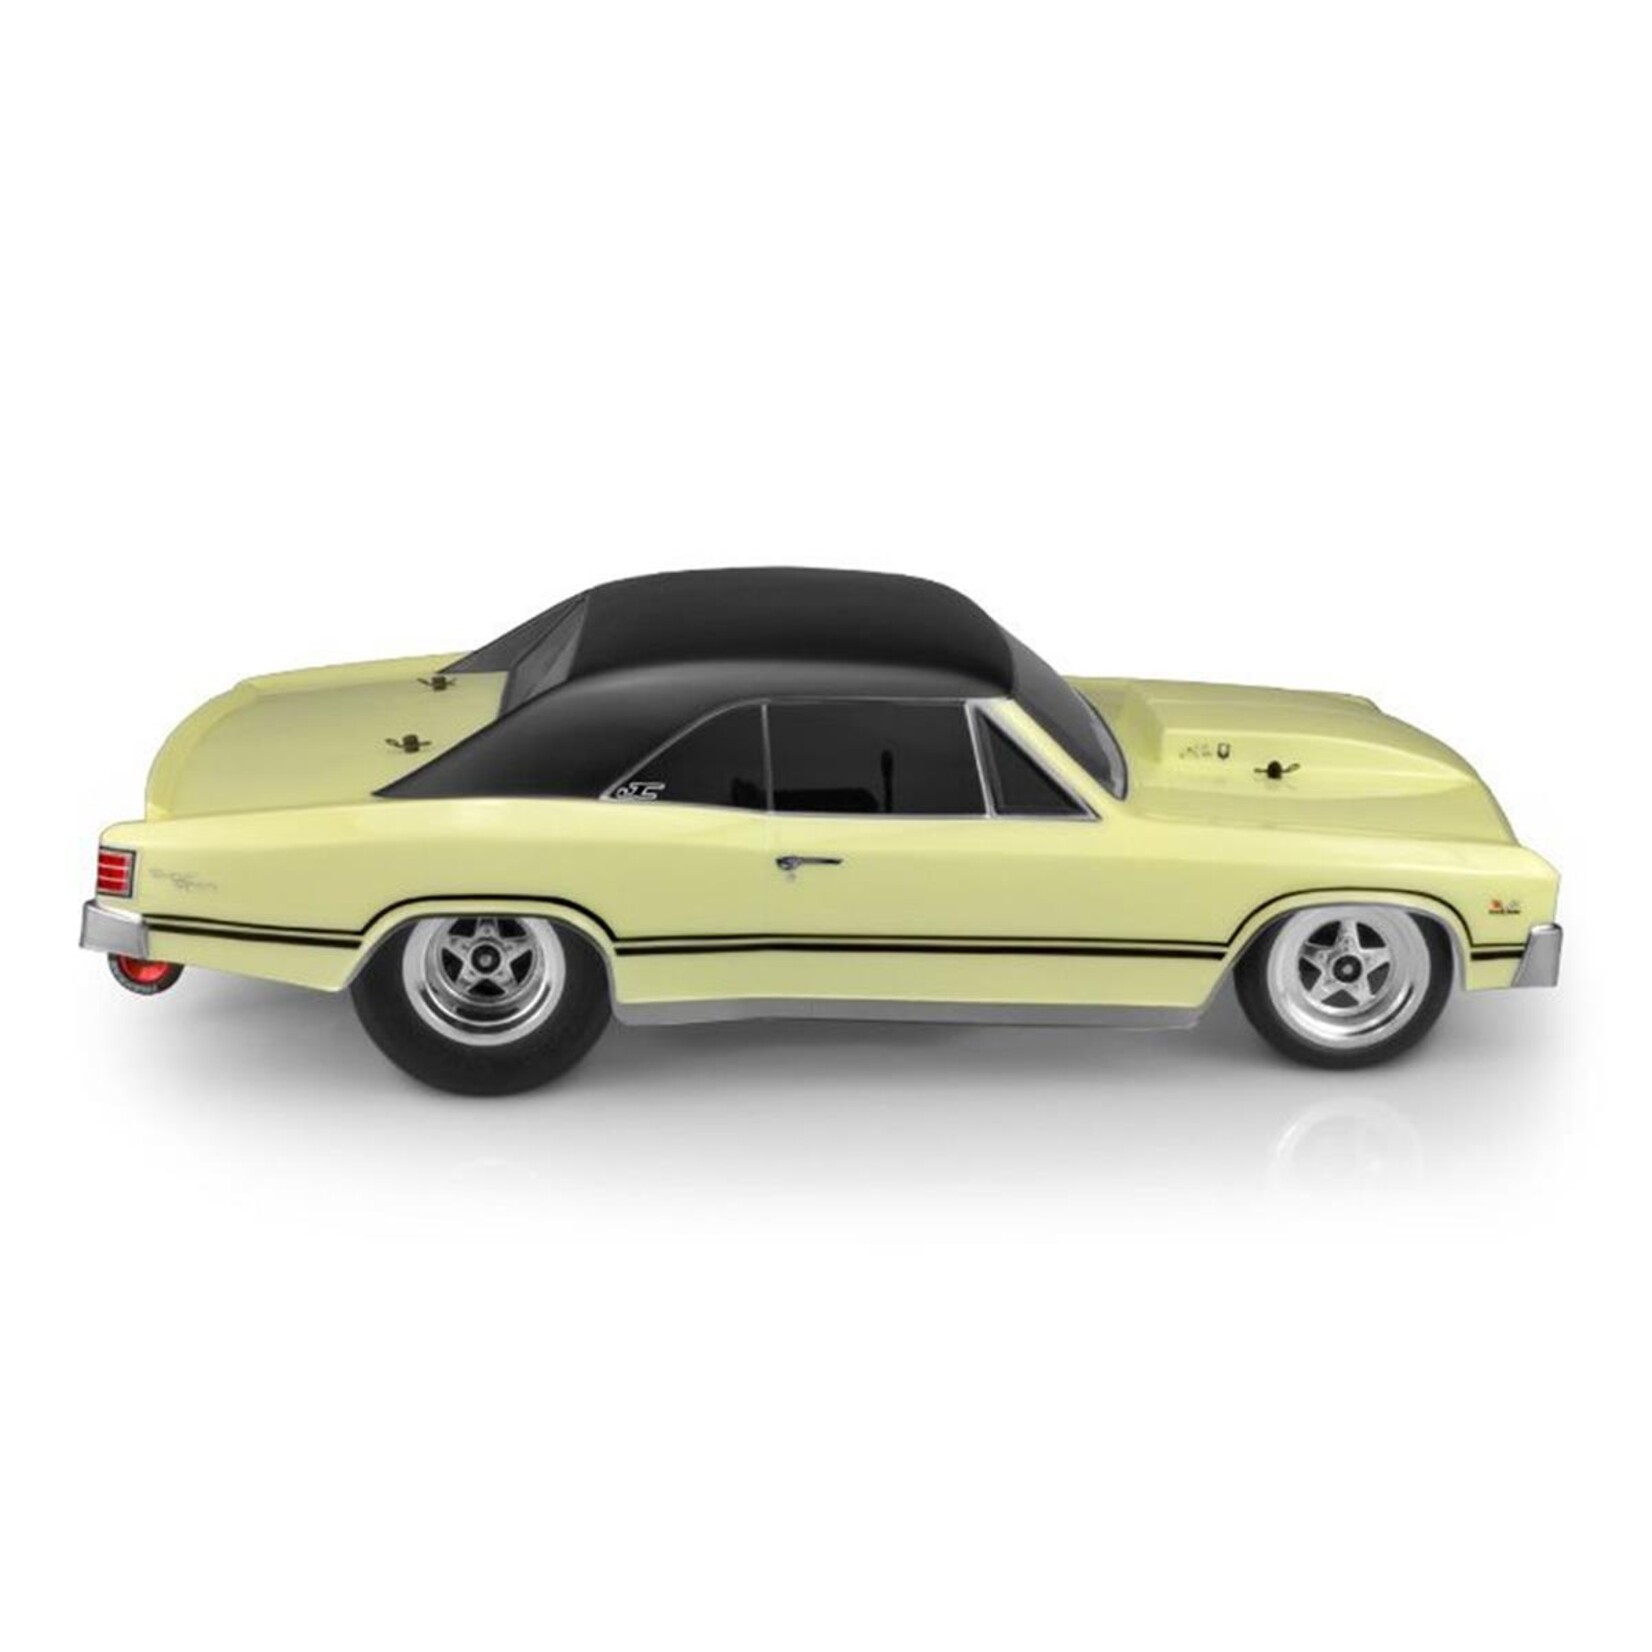 JConcepts JConcepts 1967 Chevy Chevelle Street Eliminator Drag Racing Body (Clear) #0358